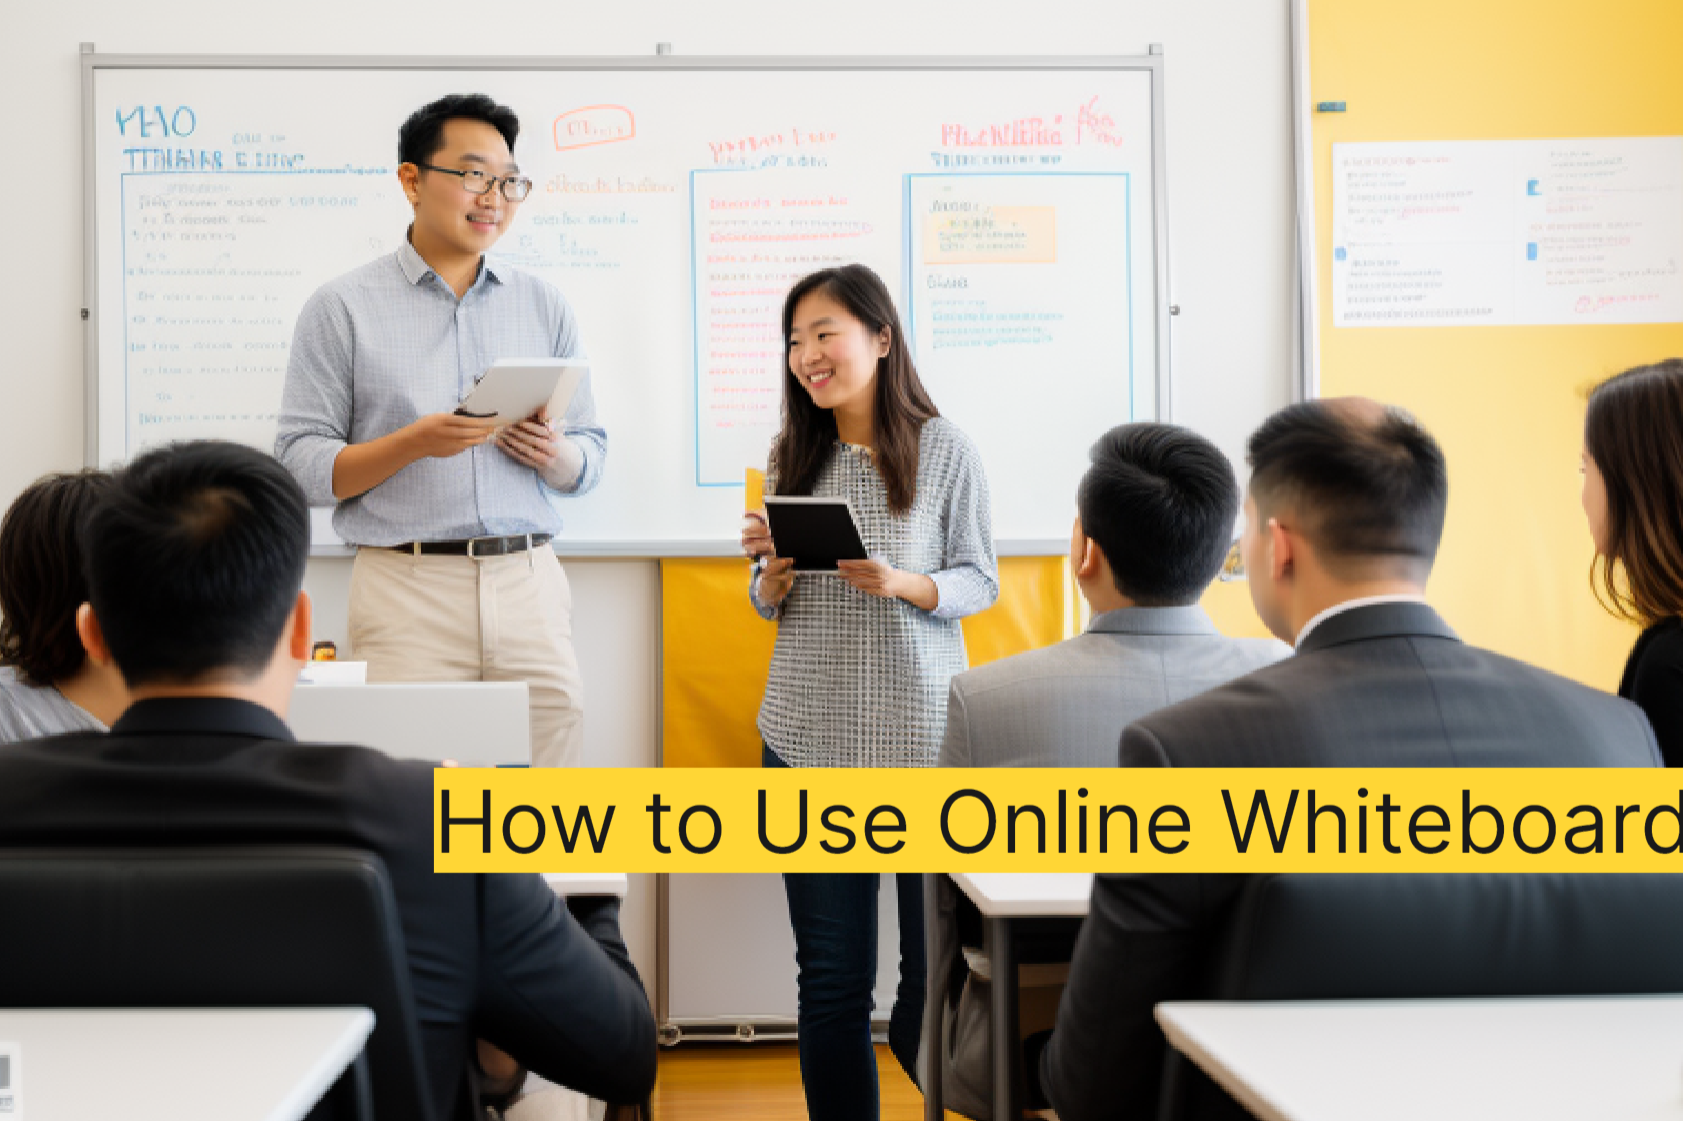 How to Use an Online Whiteboard